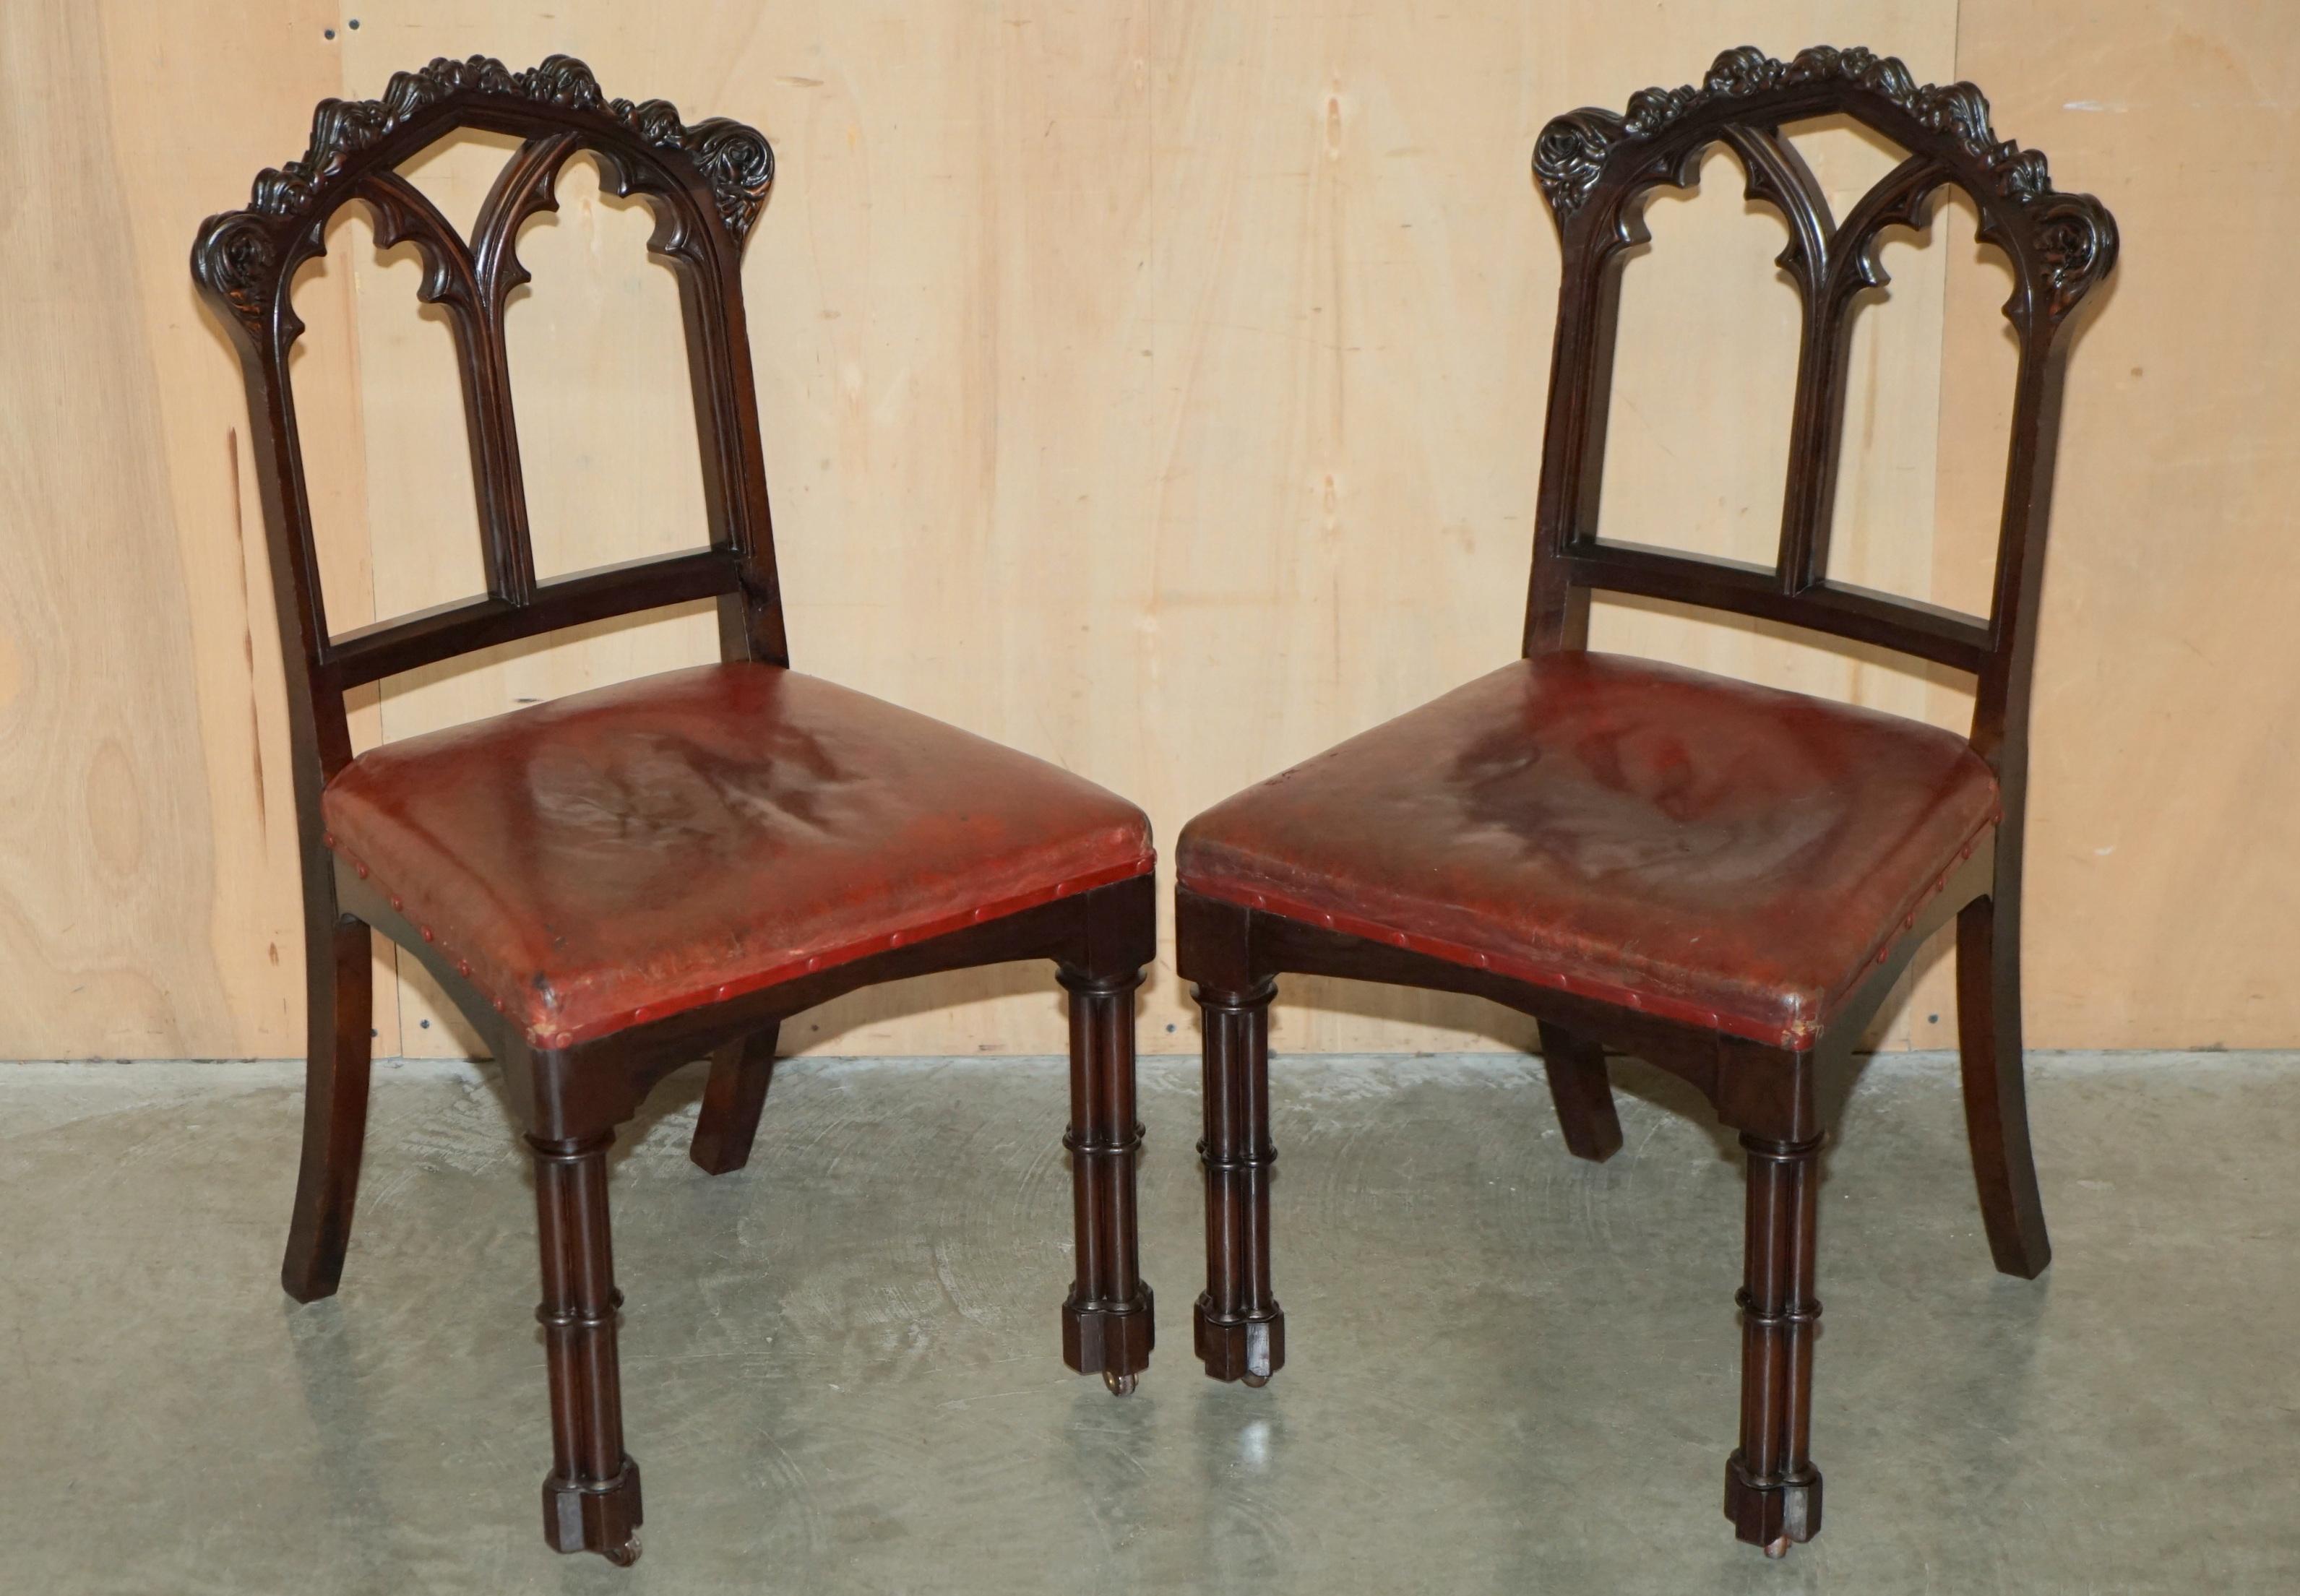 Royal House Antiques

Royal House Antiques is delighted to offer for sale this exquisite, highly collectable pair of Gothic Revival A.W.N Pugin side chairs with ornately carved frames

Please note the delivery fee listed is just a guide, it covers